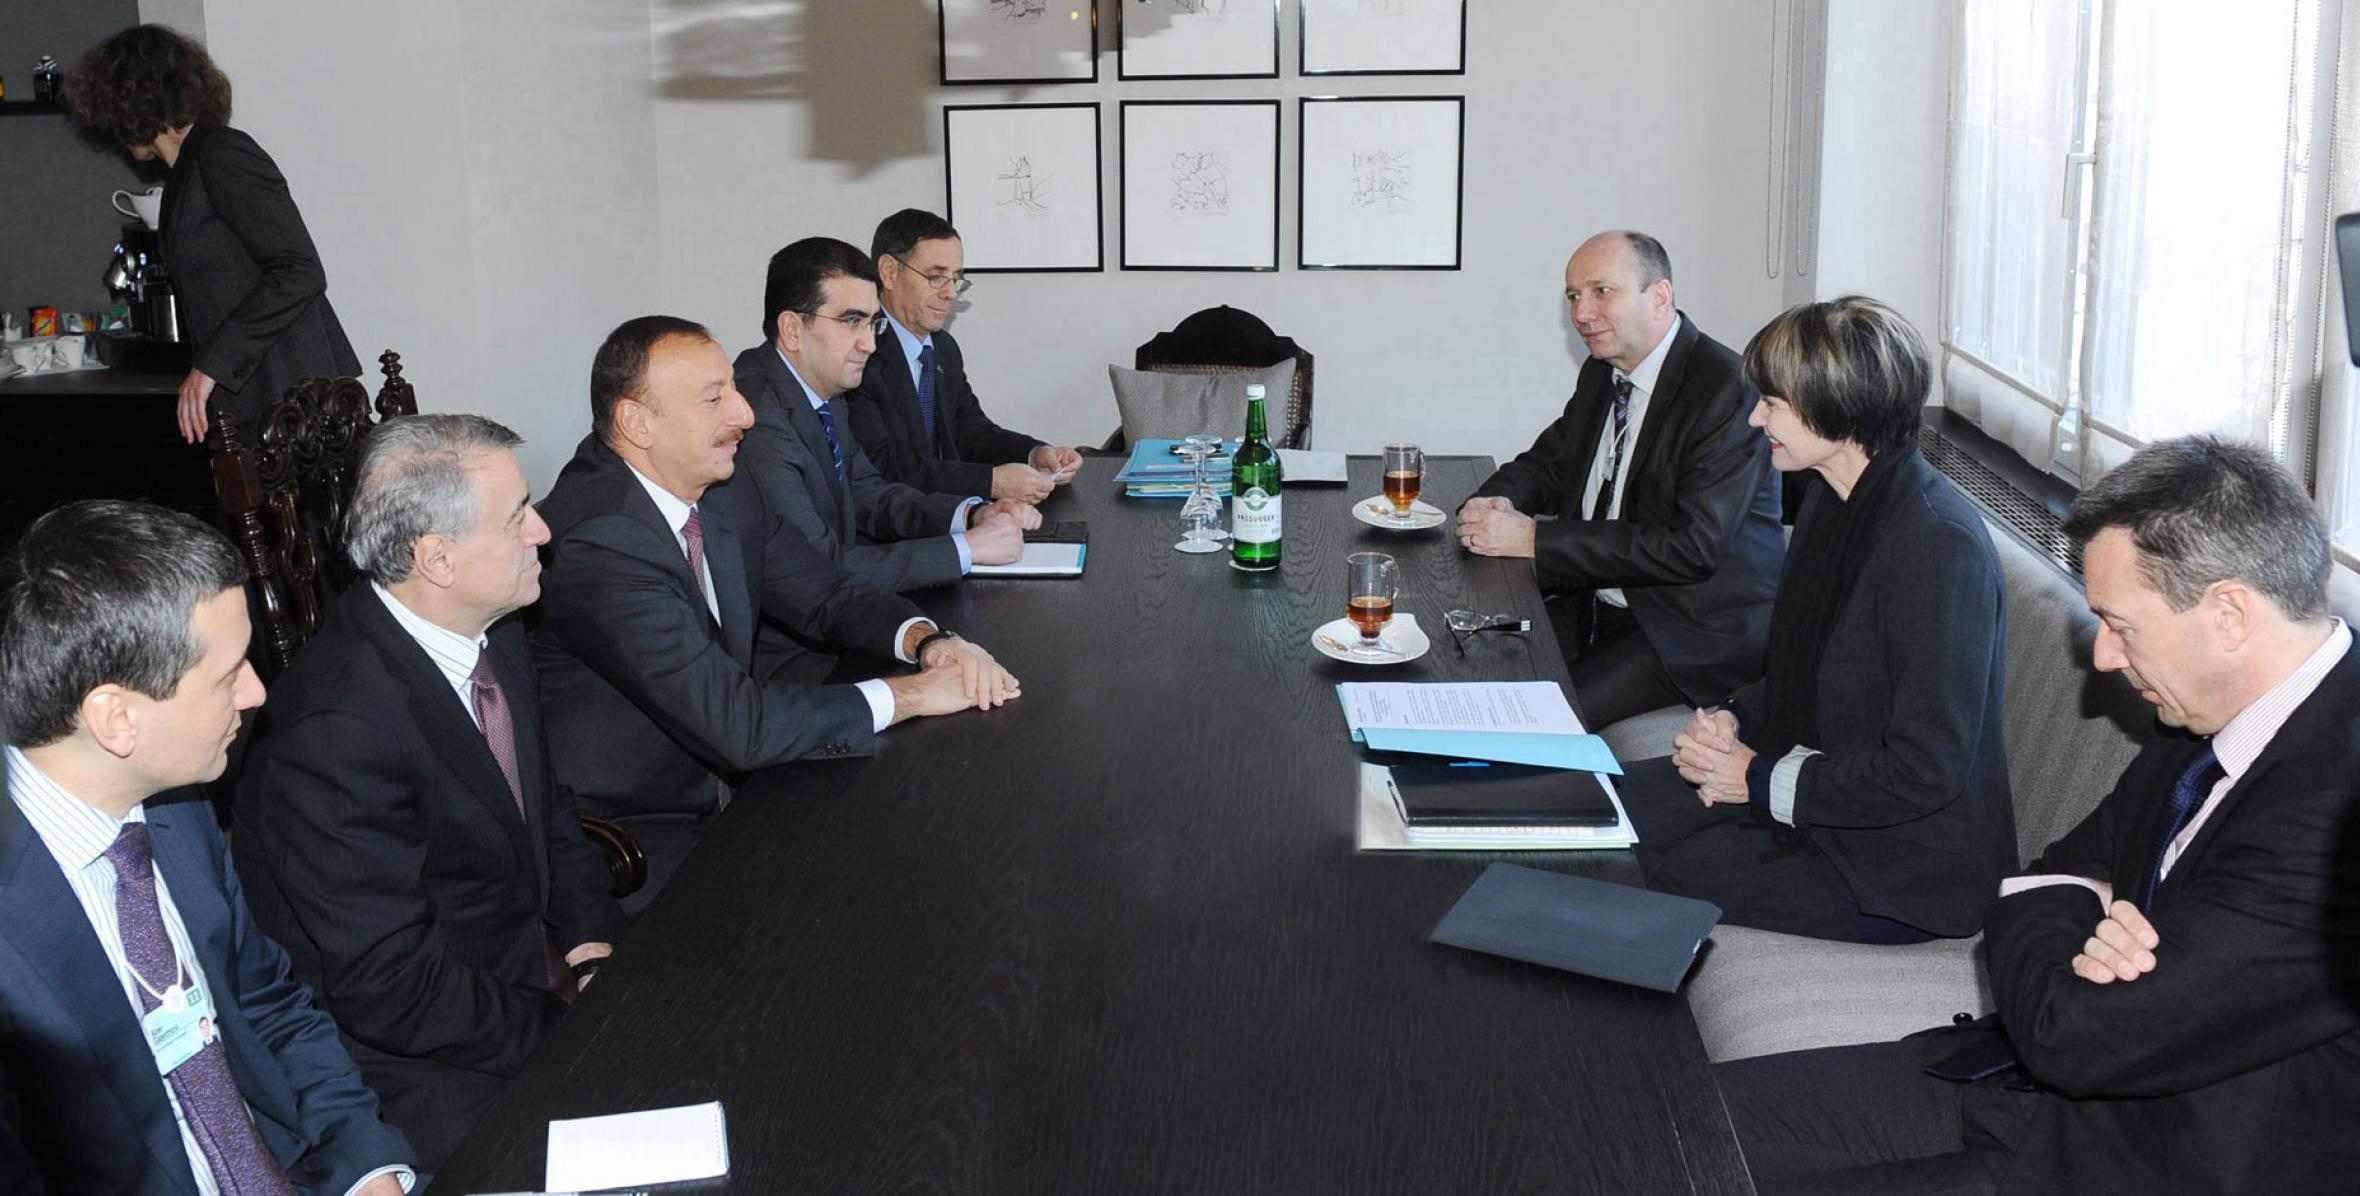 Ilham Aliyev had a meeting with President of the Swiss Confederation, Micheline Calmy-Rey